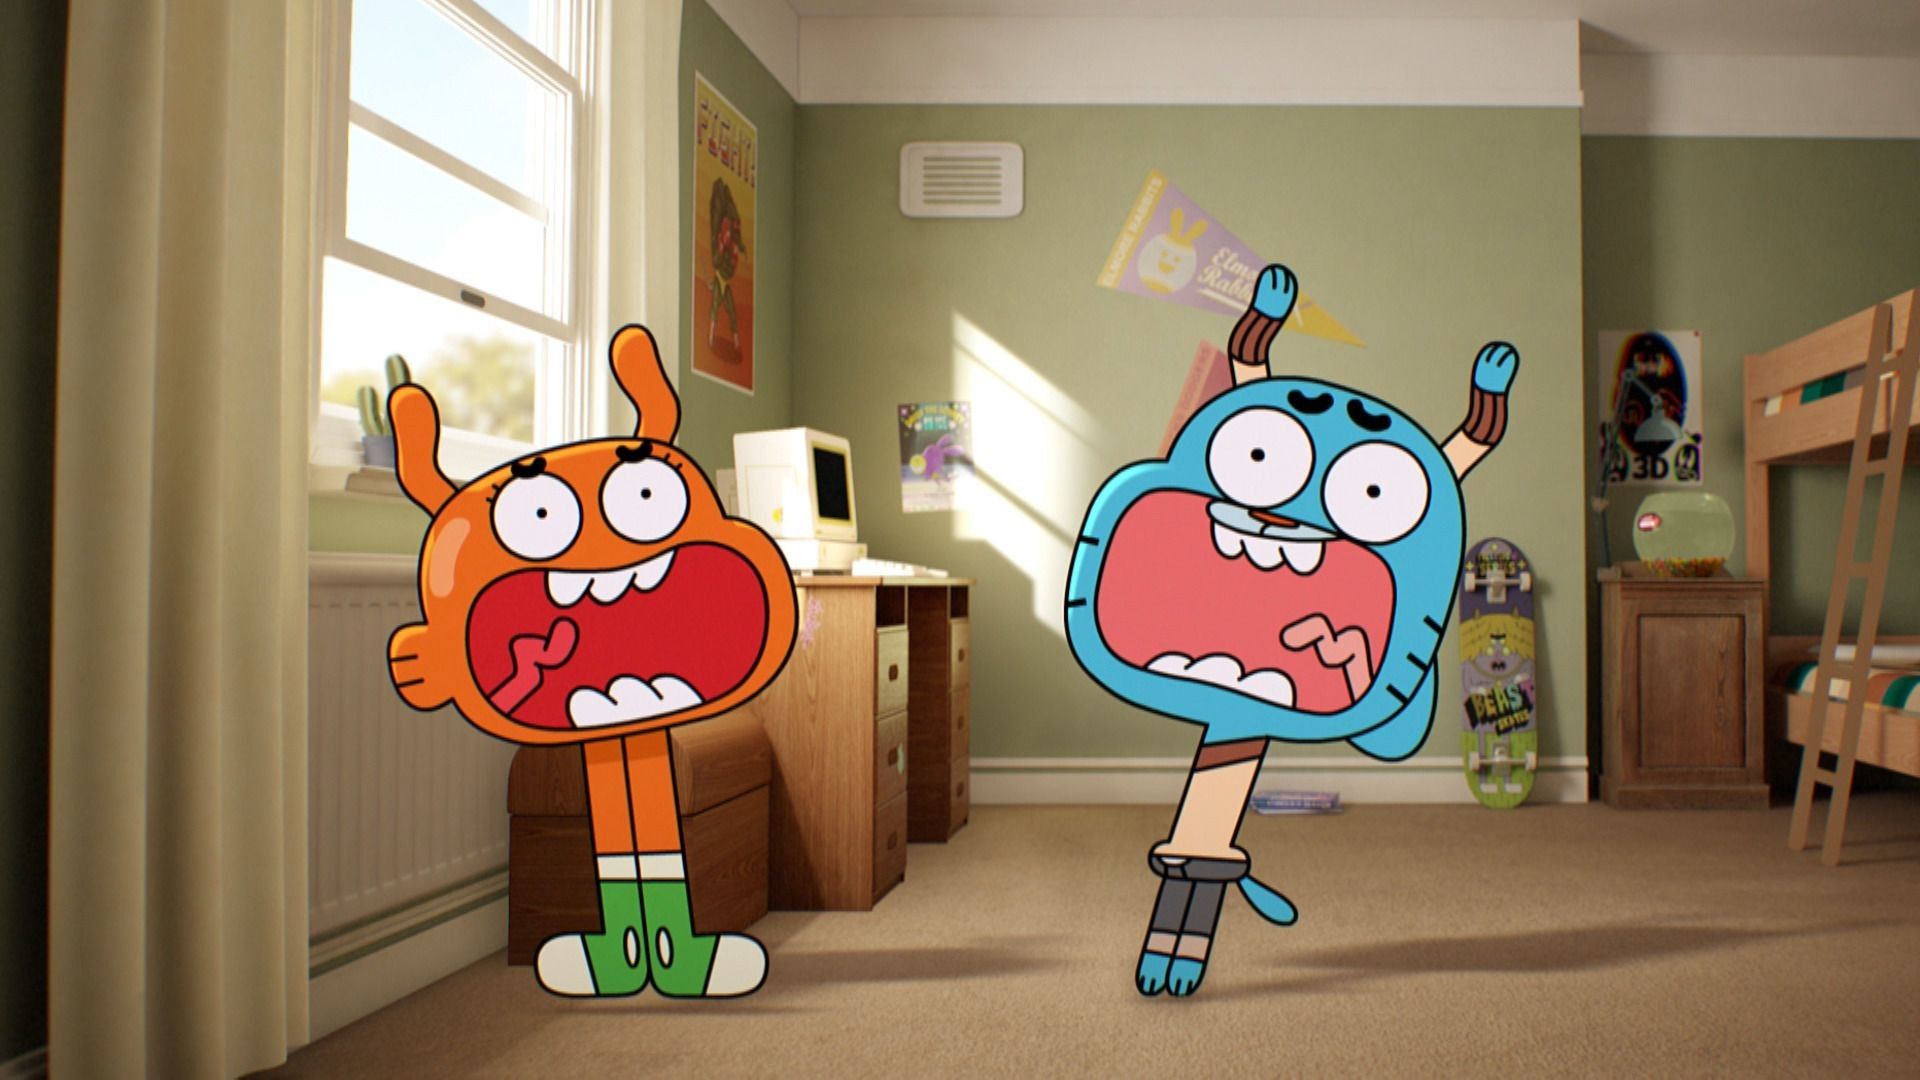 Amazing World Of Gumball Wallpapers Hd ✓ Wallpapers Directory.